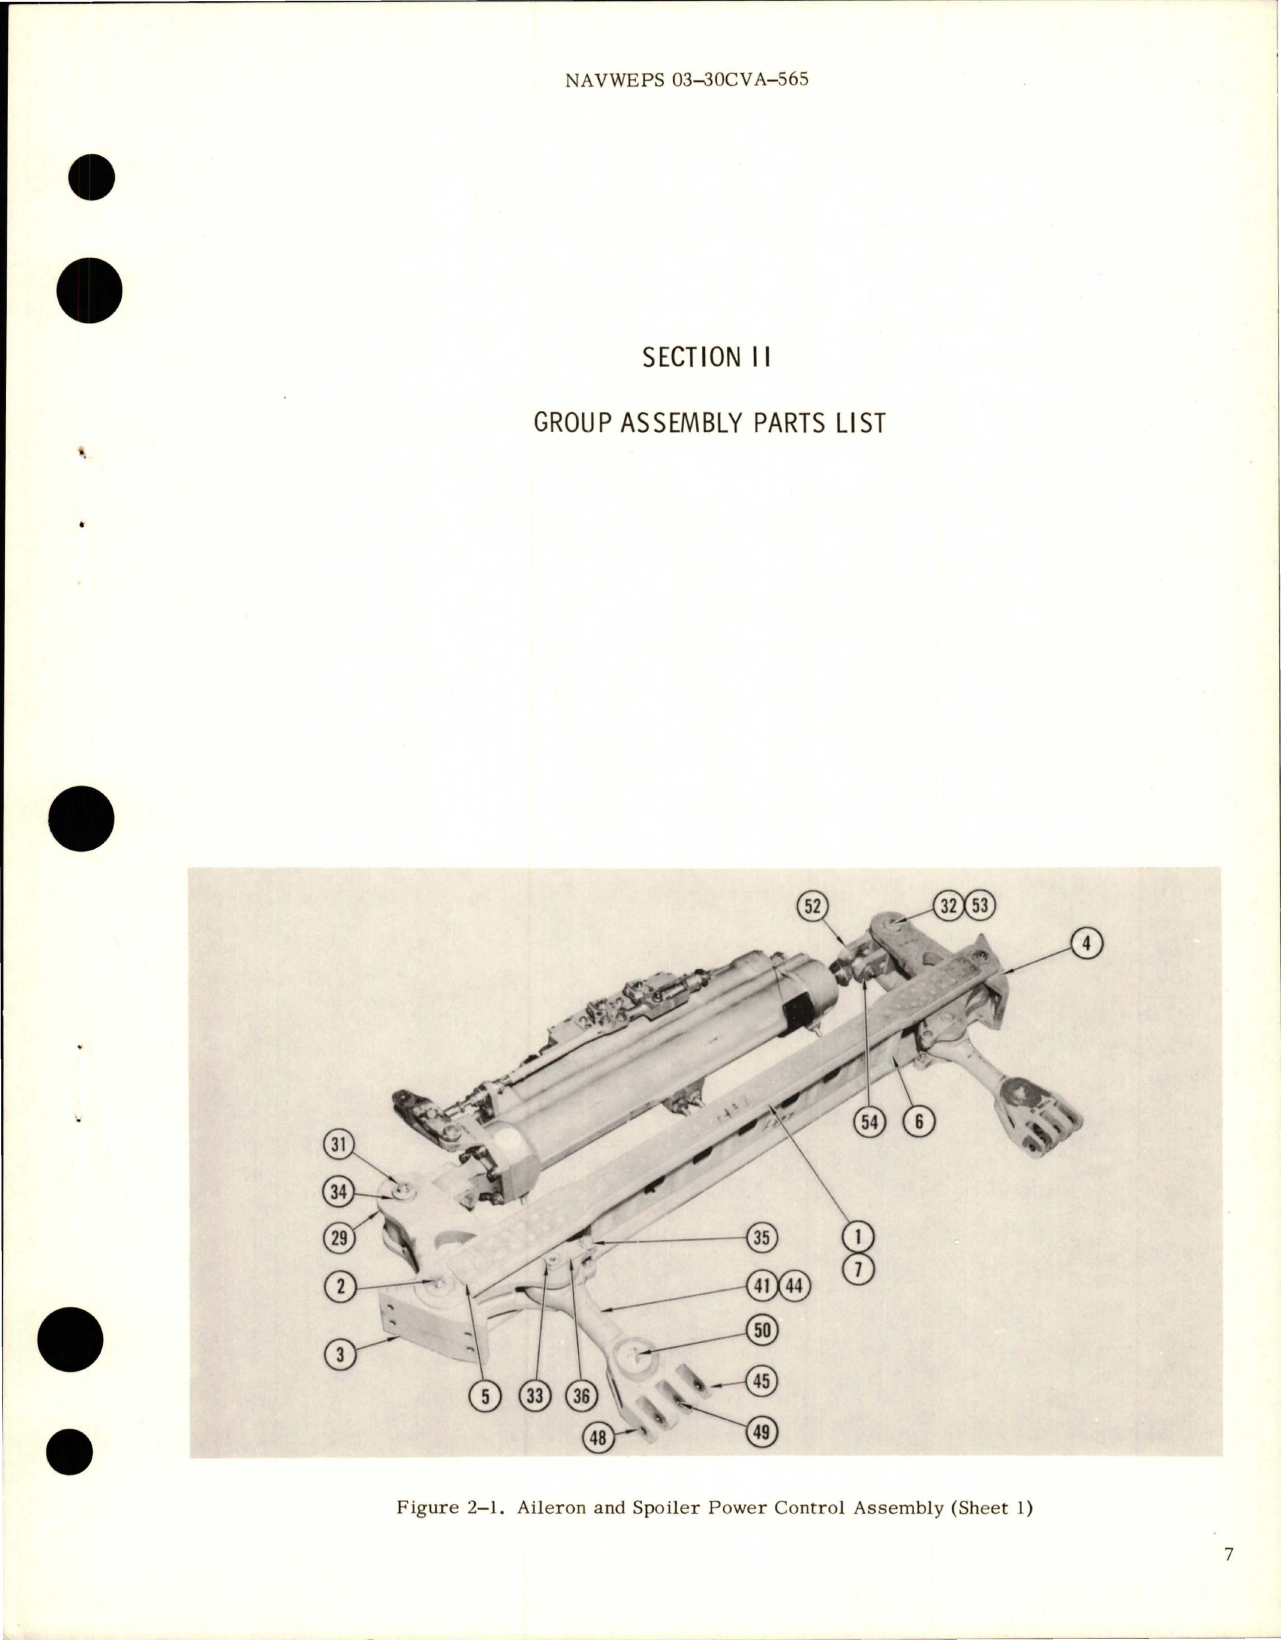 Sample page 9 from AirCorps Library document: Illustrated Parts Breakdown for Aileron and Spoiler Power Control and Cylinder Assemblies, Rigging and Synchronization Fixtures